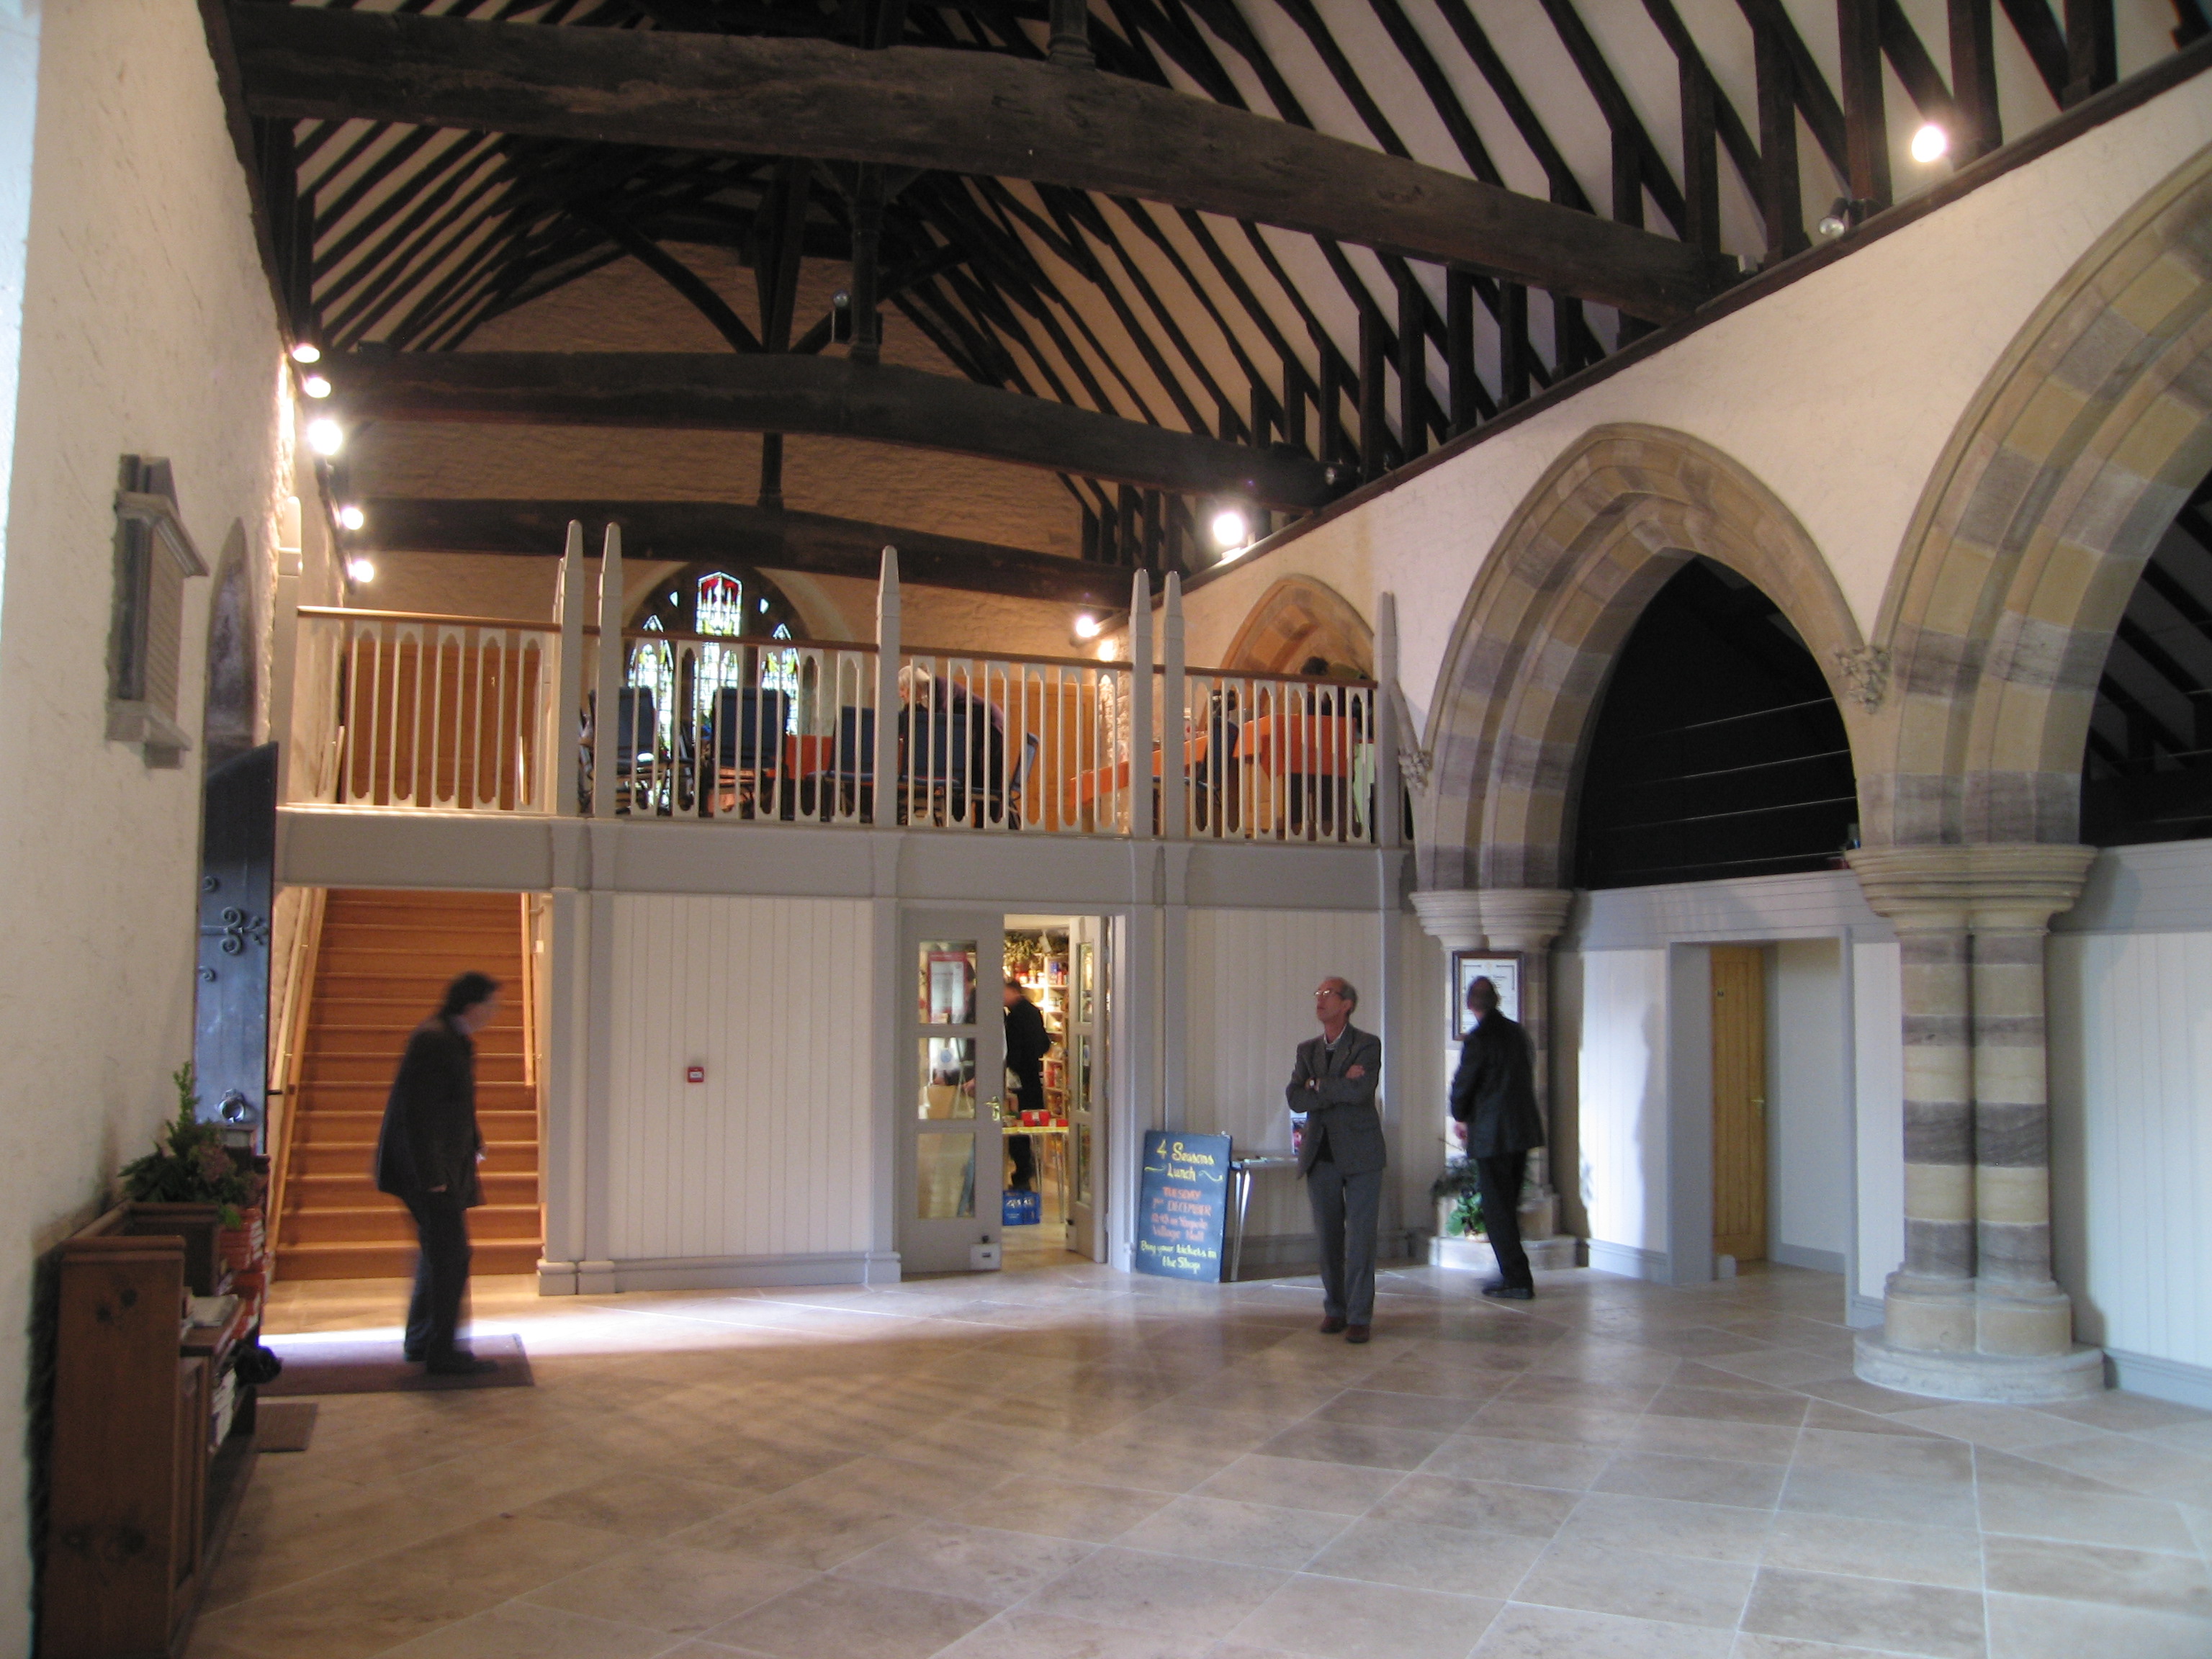 Interior of a church in Yarpole where a gallery and shop have been added and the space made more flexible.